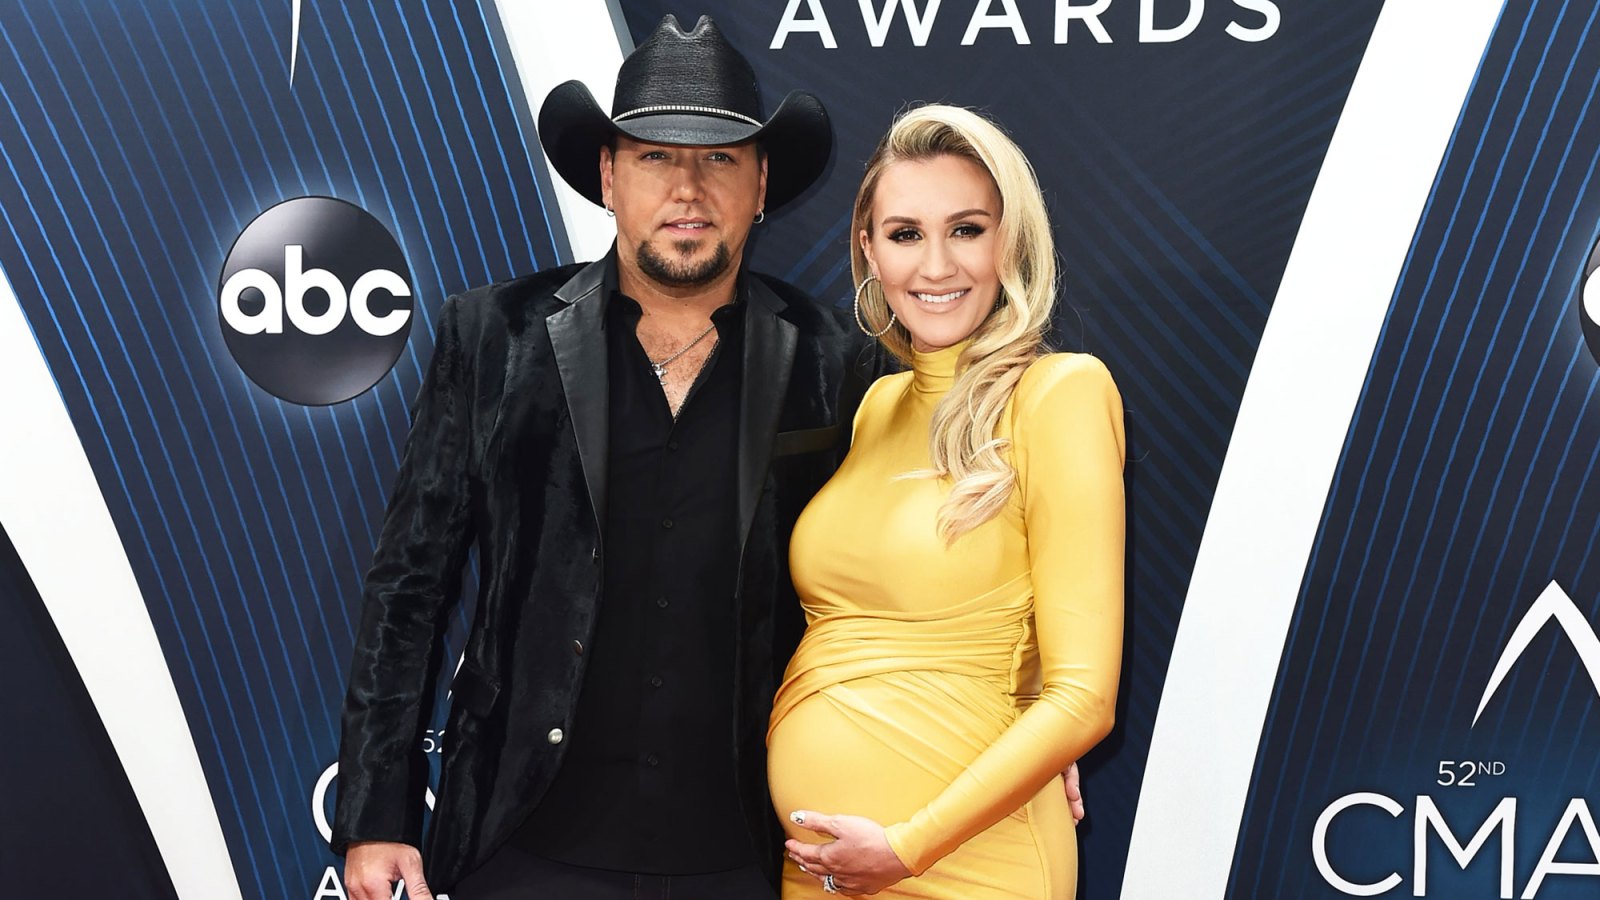 JASON ALDEAN, BRITTANY KERR Is About to Pop Any Second’: See Her Bump